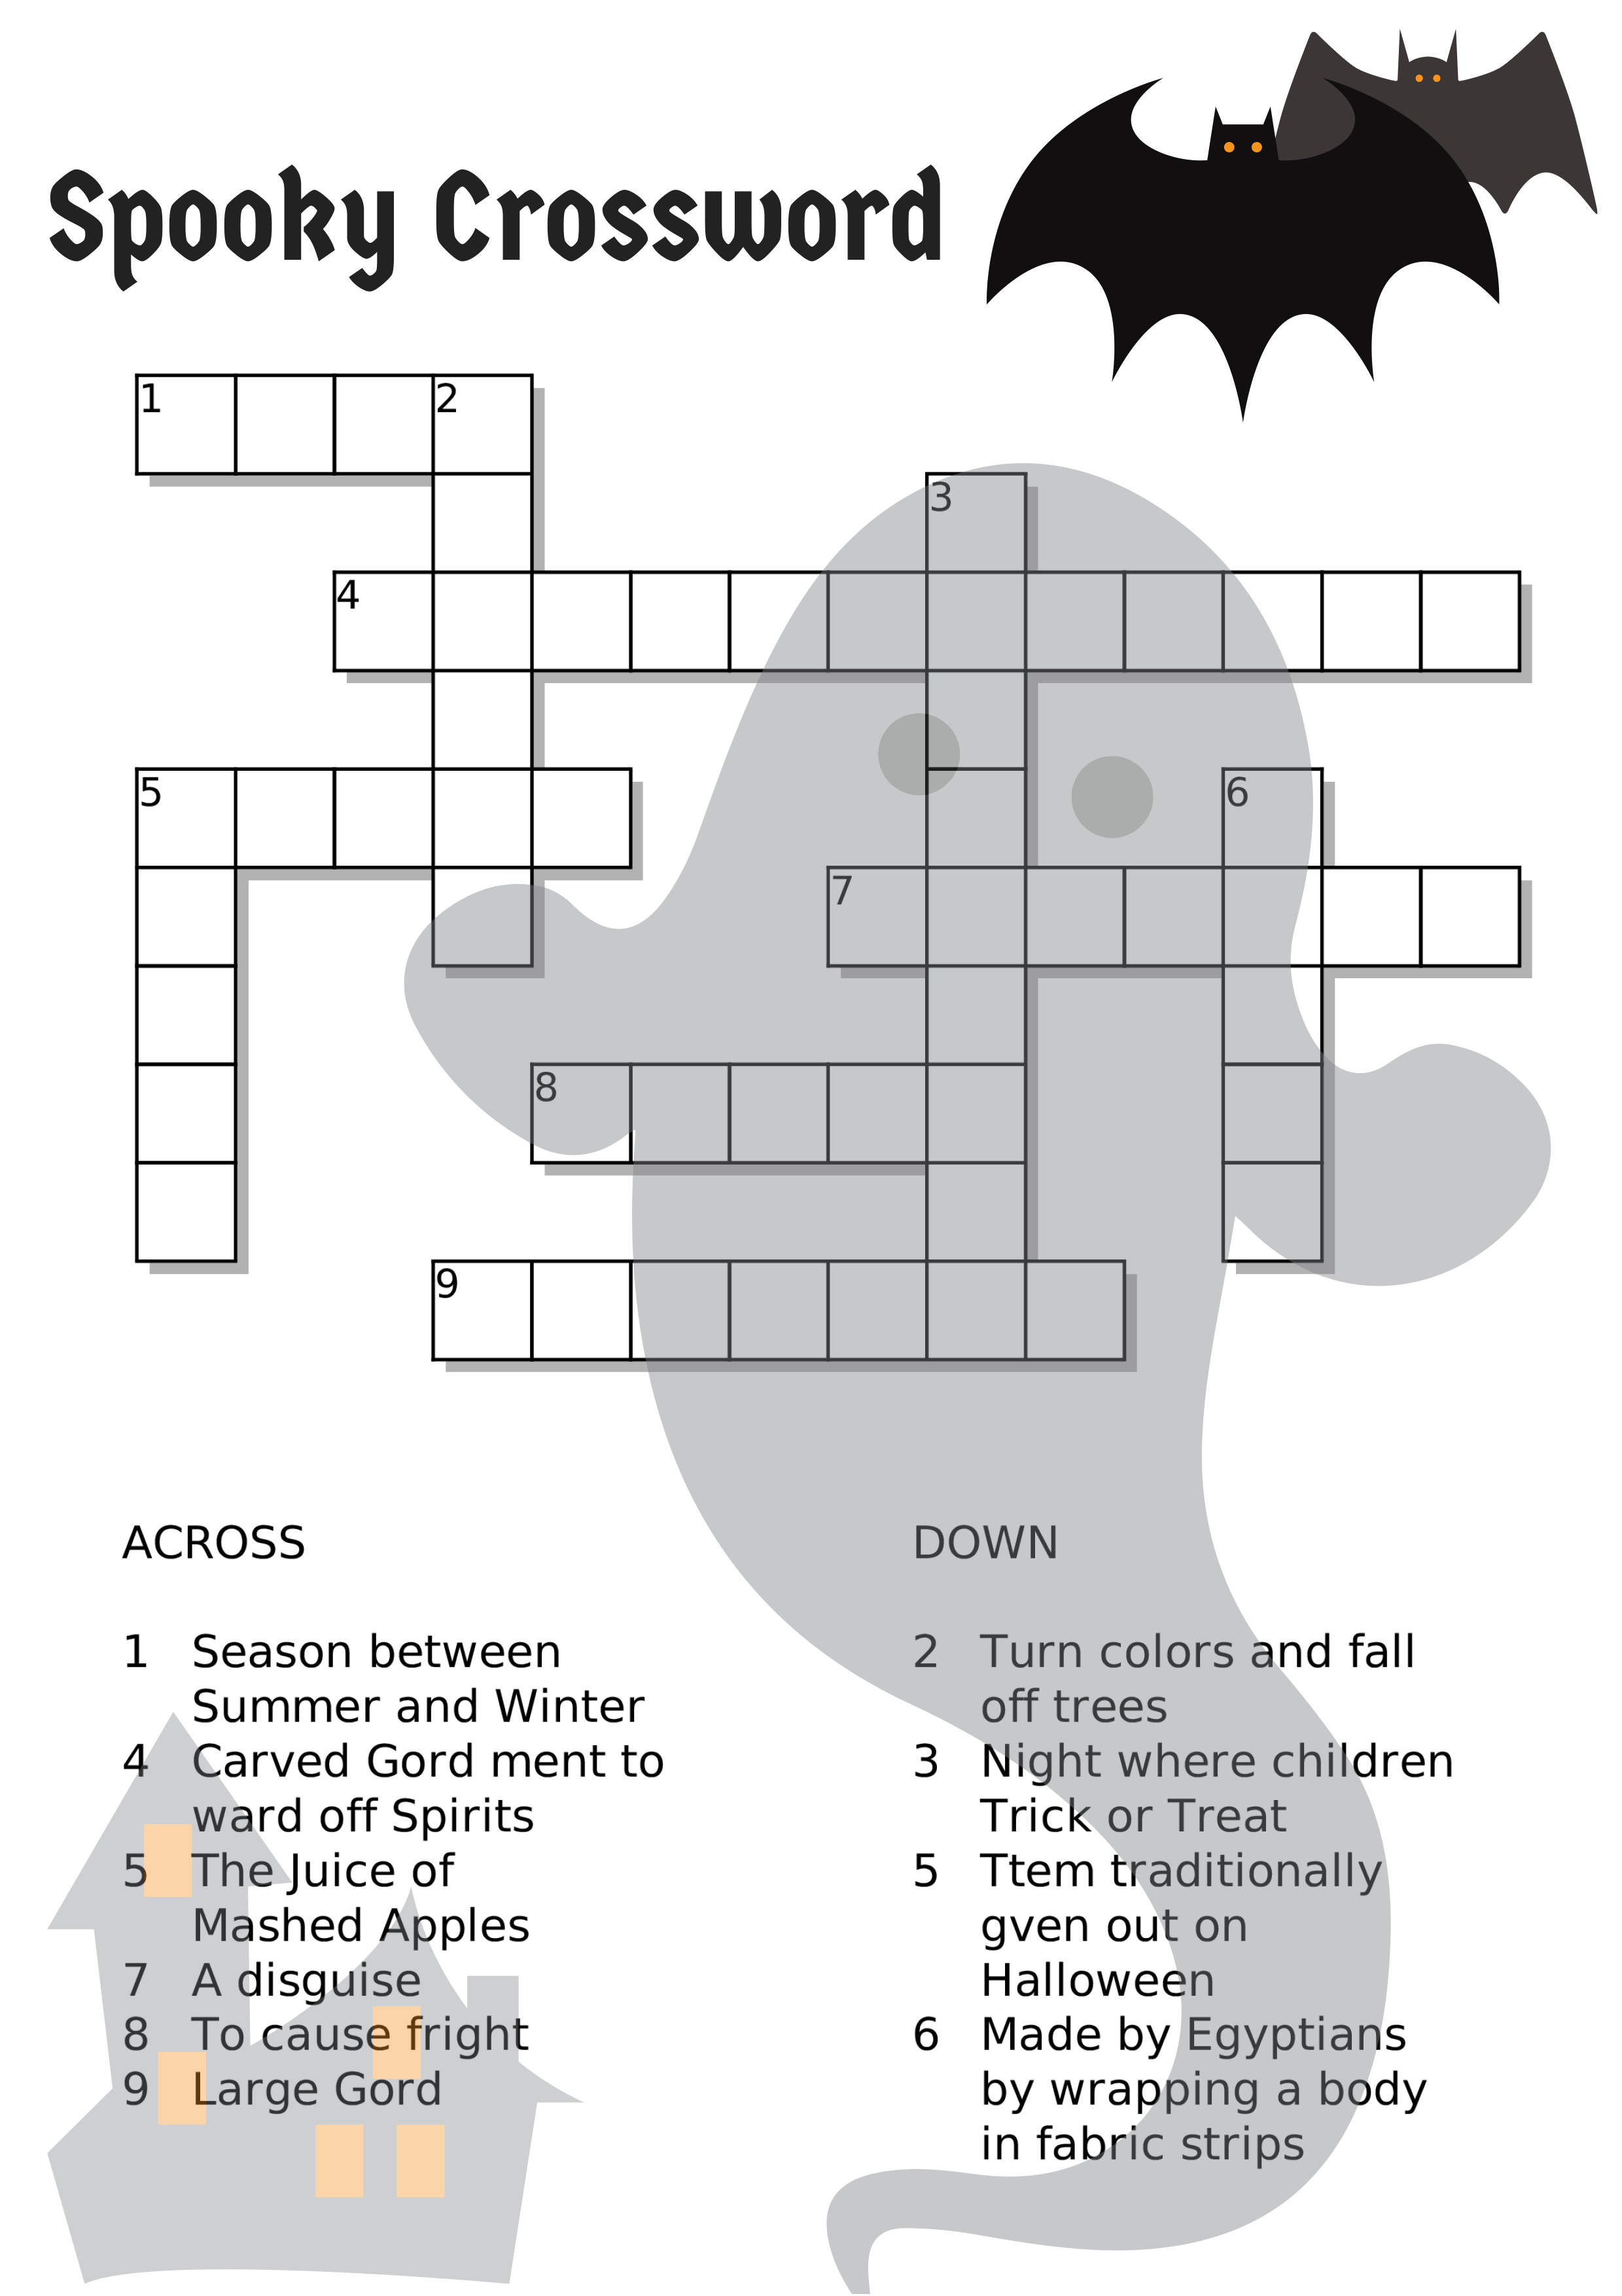 they might spook spelunkers crossword